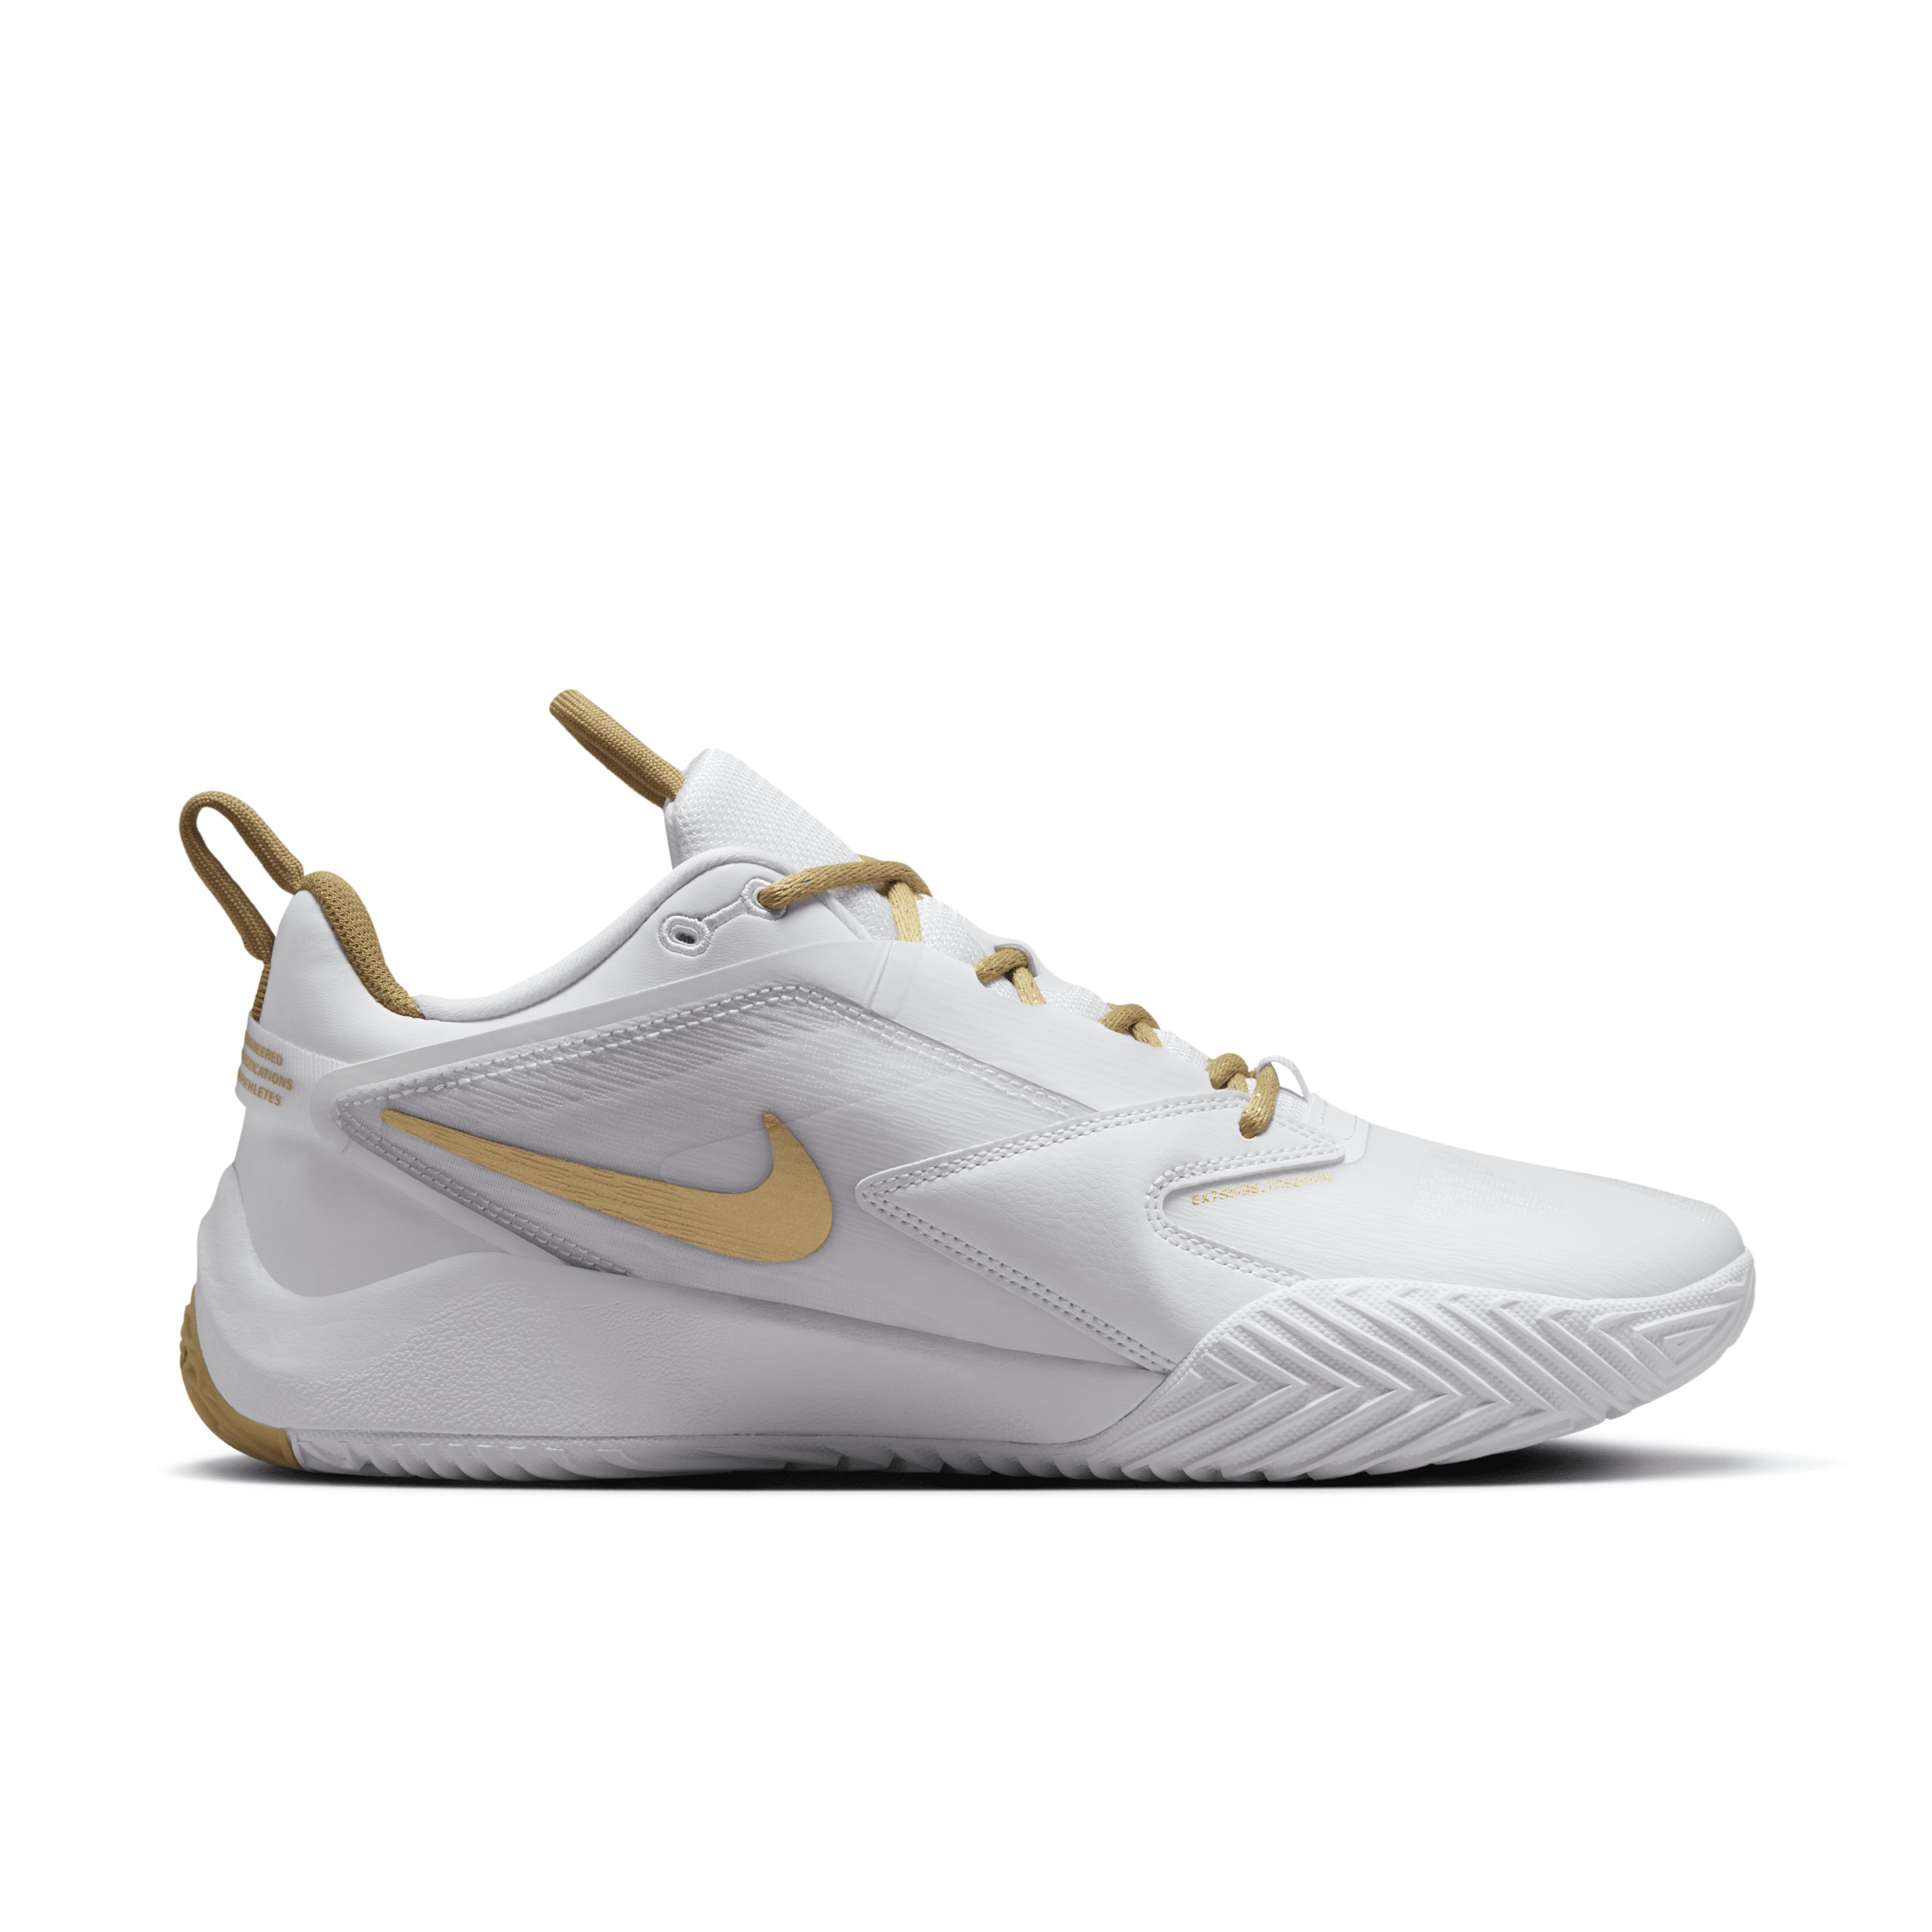 Nike Unisex HyperAce 3 Volleyball Shoes - 3